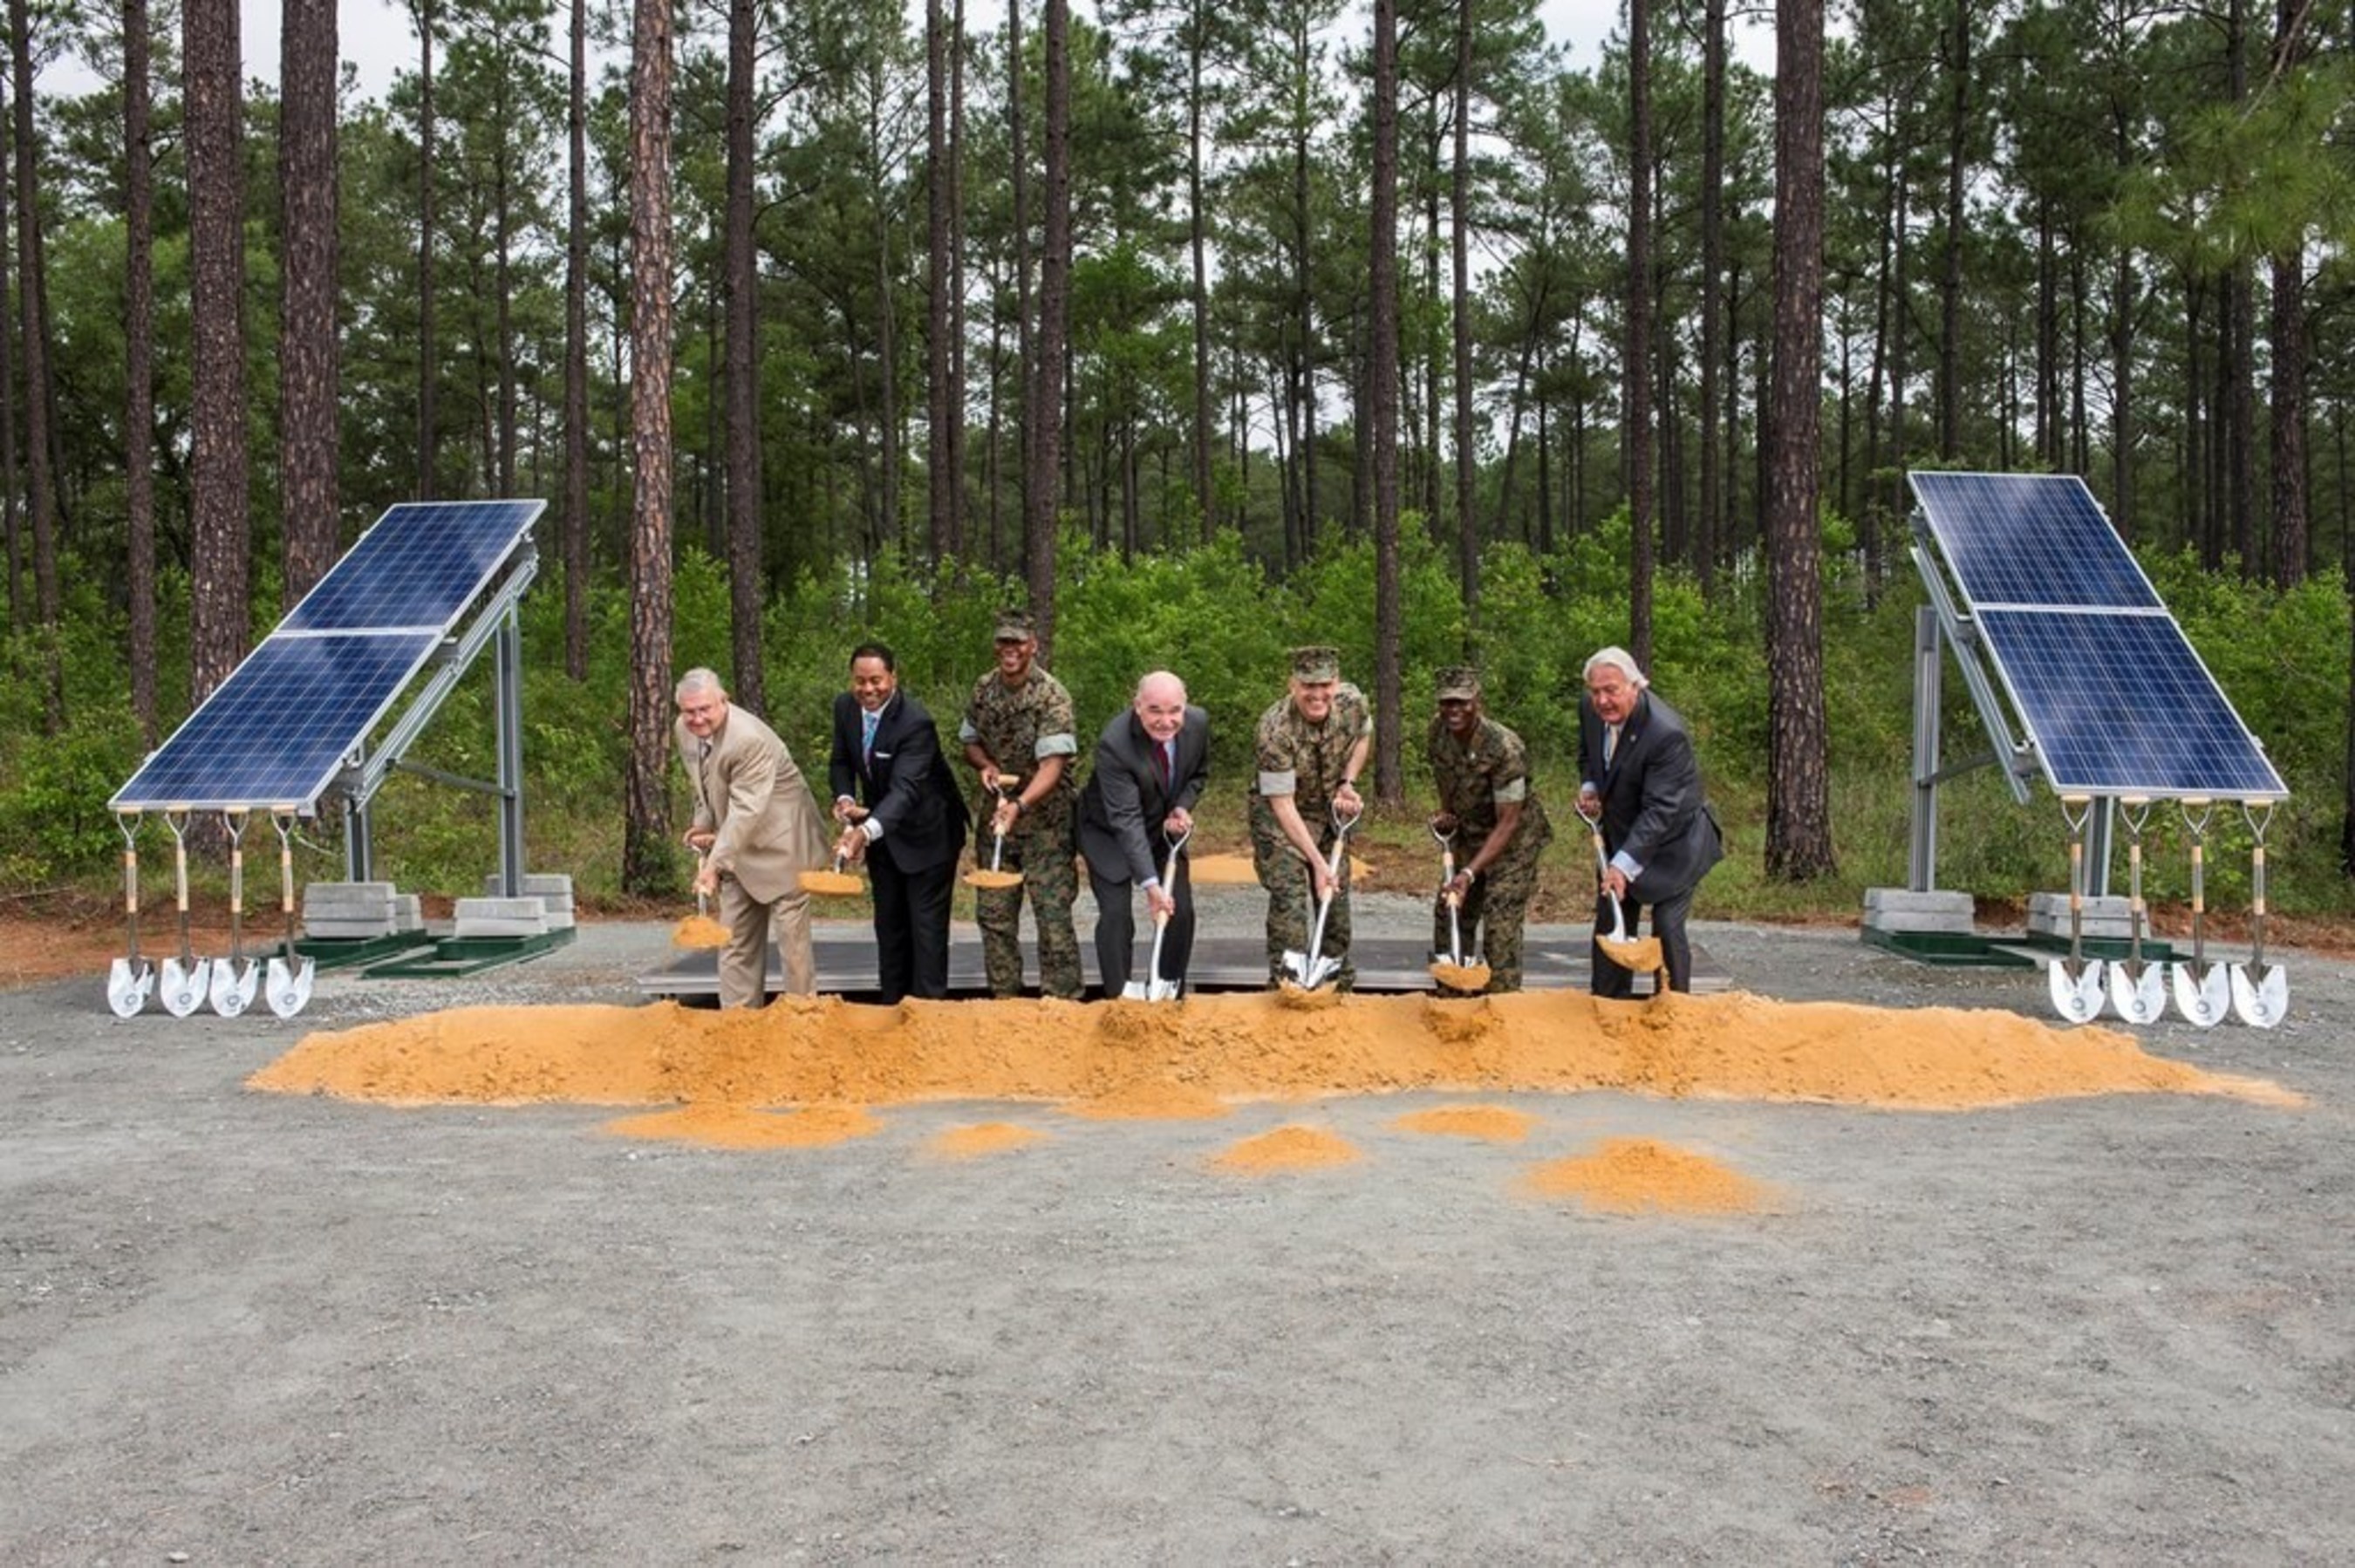 Georgia Power, the Department of the Navy, Marine Corps Logistics Base (MCLB Albany) and the Georgia Public Service Commission break ground on a new solar facility at MCLB Albany on April 28, 2016.